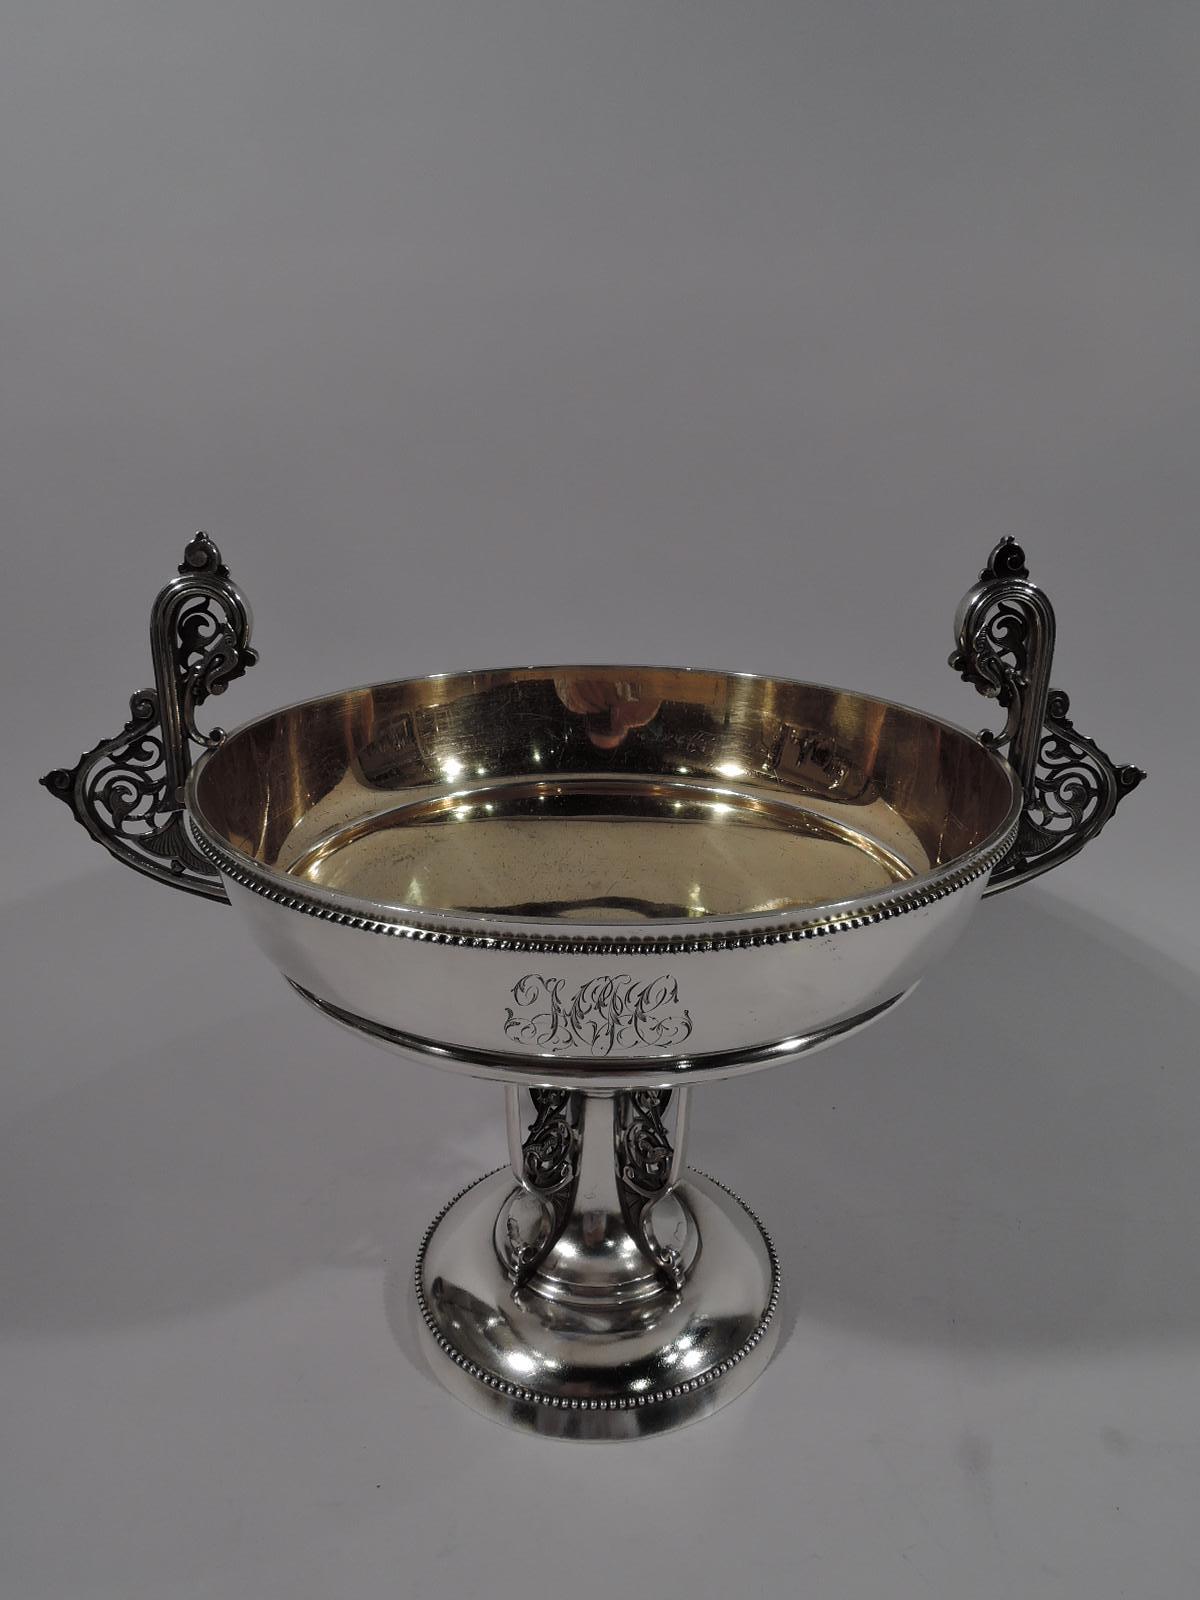 Rare Moresque sterling silver compote. Made by John C. Moore for Tiffany & Co. in New York. Greek kylix with round and flat bowl, knopped and tapering shaft, and double-domed base. Cast openwork brackets with mounted as side handles and to shaft.